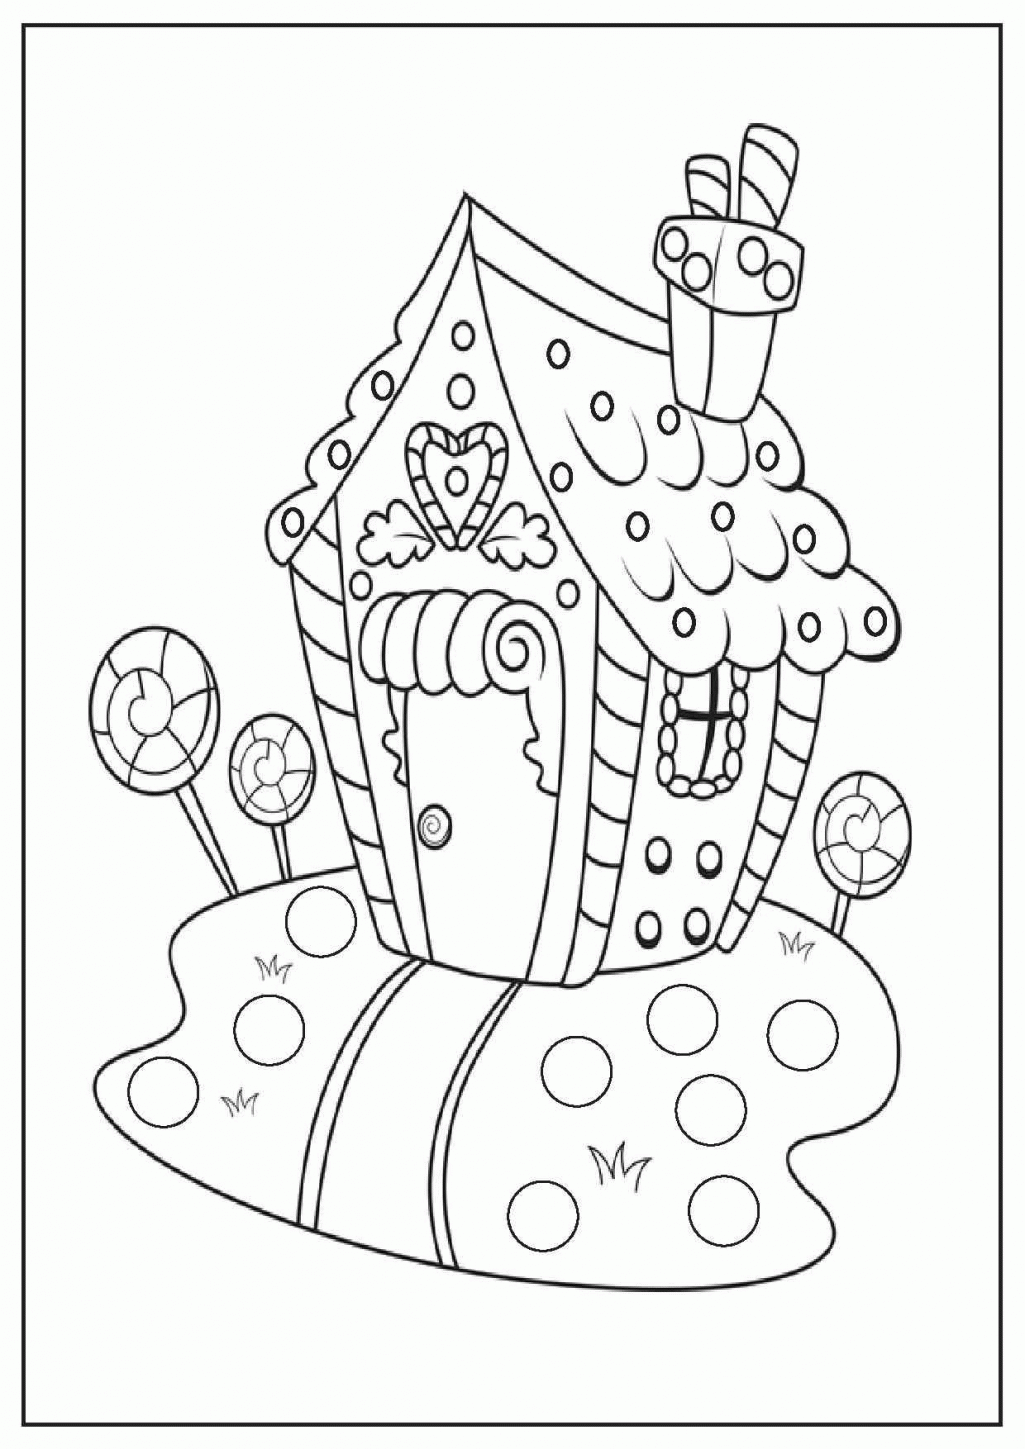 Christmas Worksheets For Kids/ Coloring : Christmas Fun Pages: Free 15